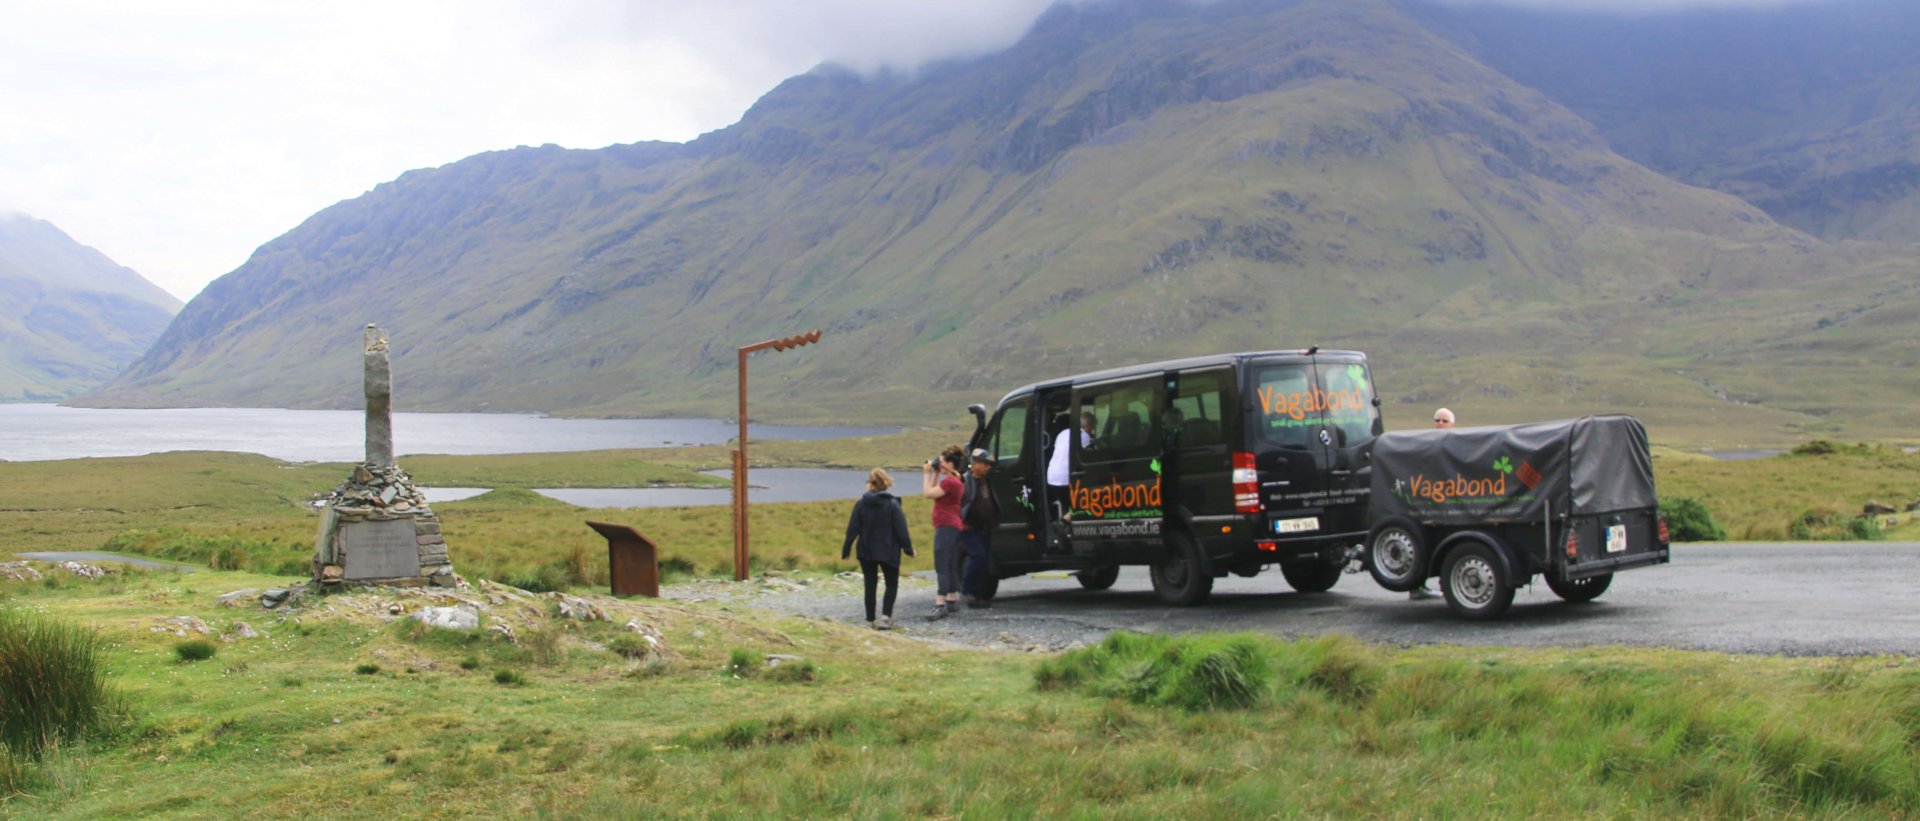 A Vagabond group taking in the views at the Doolough Valley in the sunshine